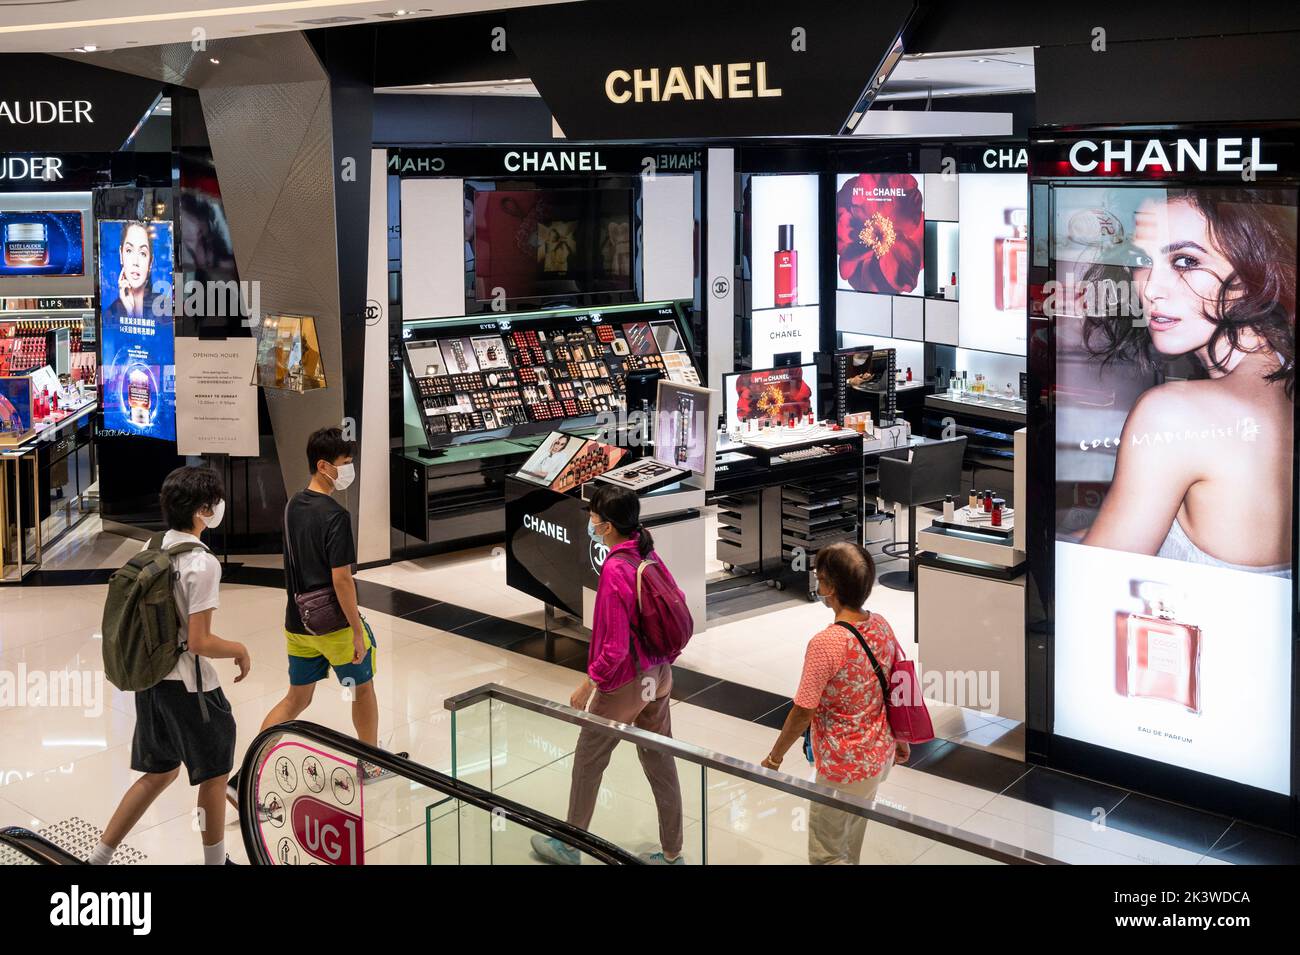 Shoppers walk past the French multinational Chanel clothing and beauty products brand store in Hong Kong. Stock Photo